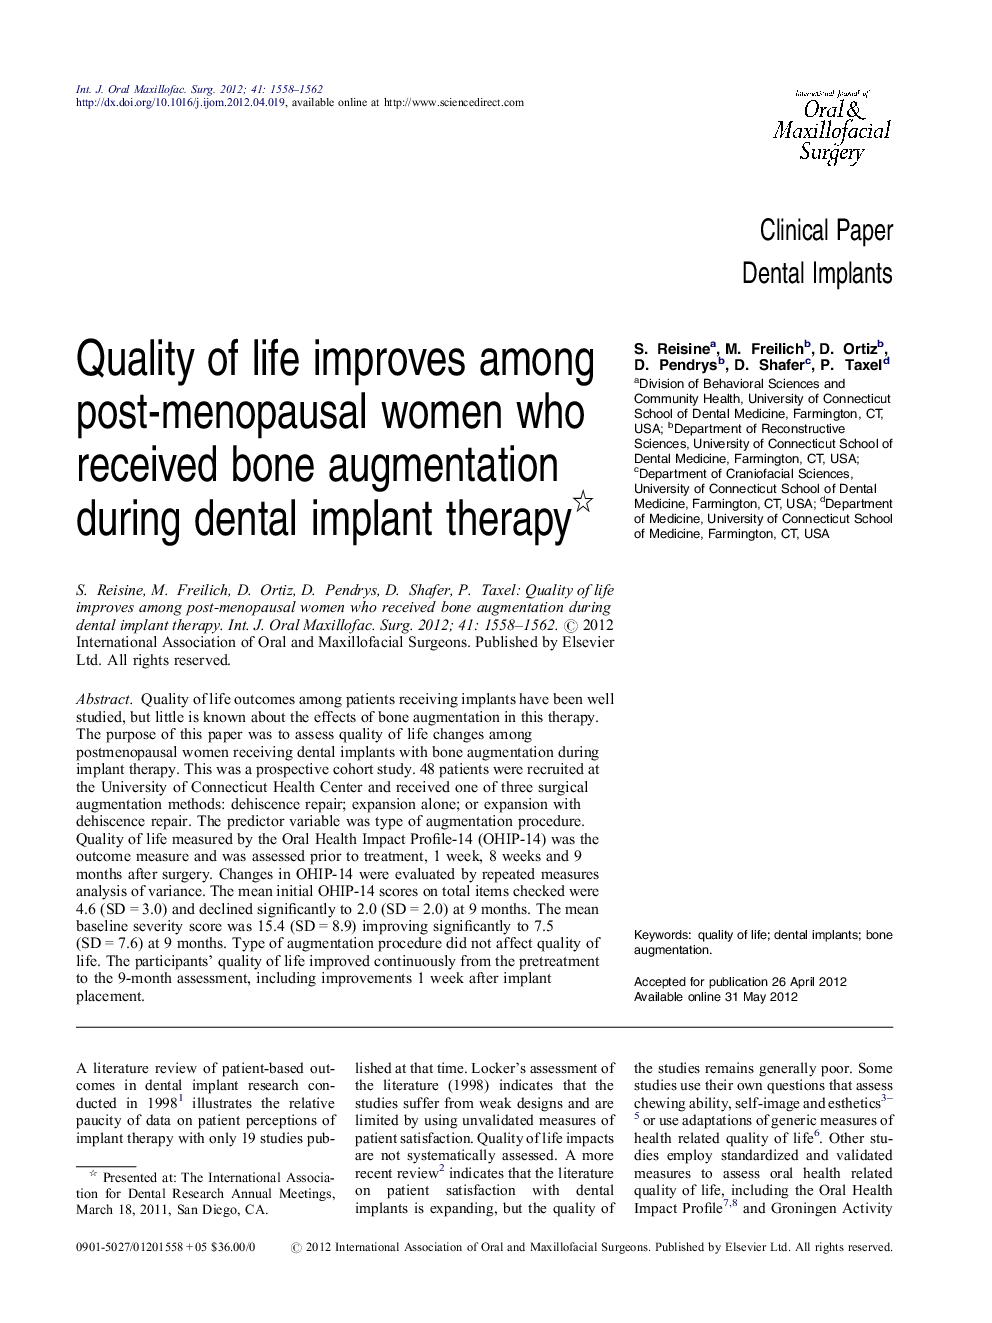 Quality of life improves among post-menopausal women who received bone augmentation during dental implant therapy 